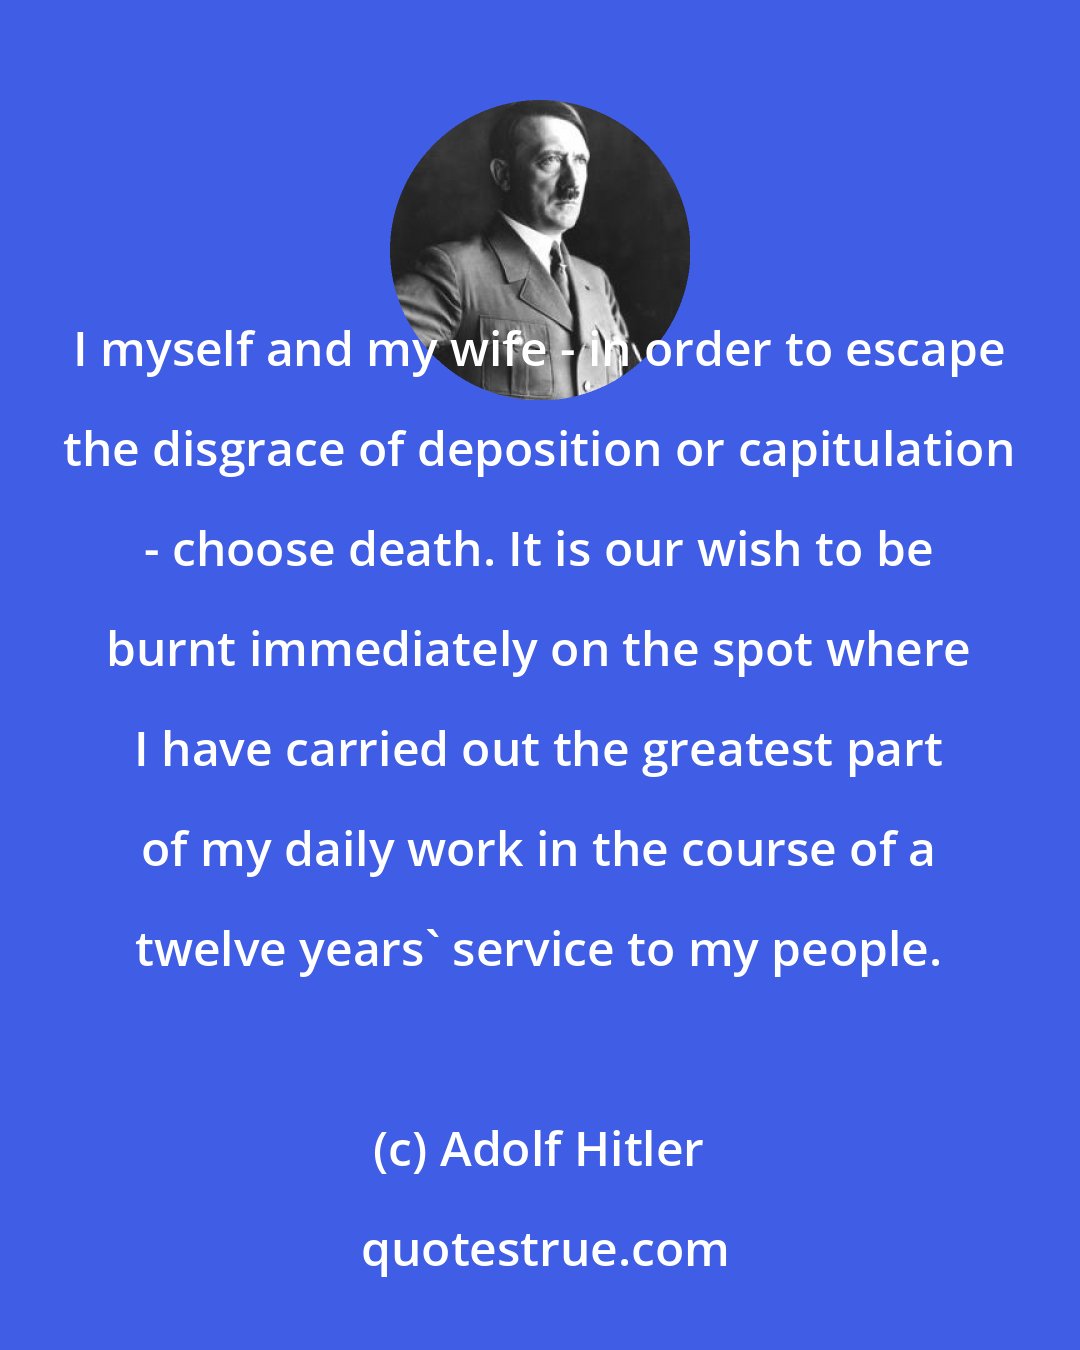 Adolf Hitler: I myself and my wife - in order to escape the disgrace of deposition or capitulation - choose death. It is our wish to be burnt immediately on the spot where I have carried out the greatest part of my daily work in the course of a twelve years' service to my people.